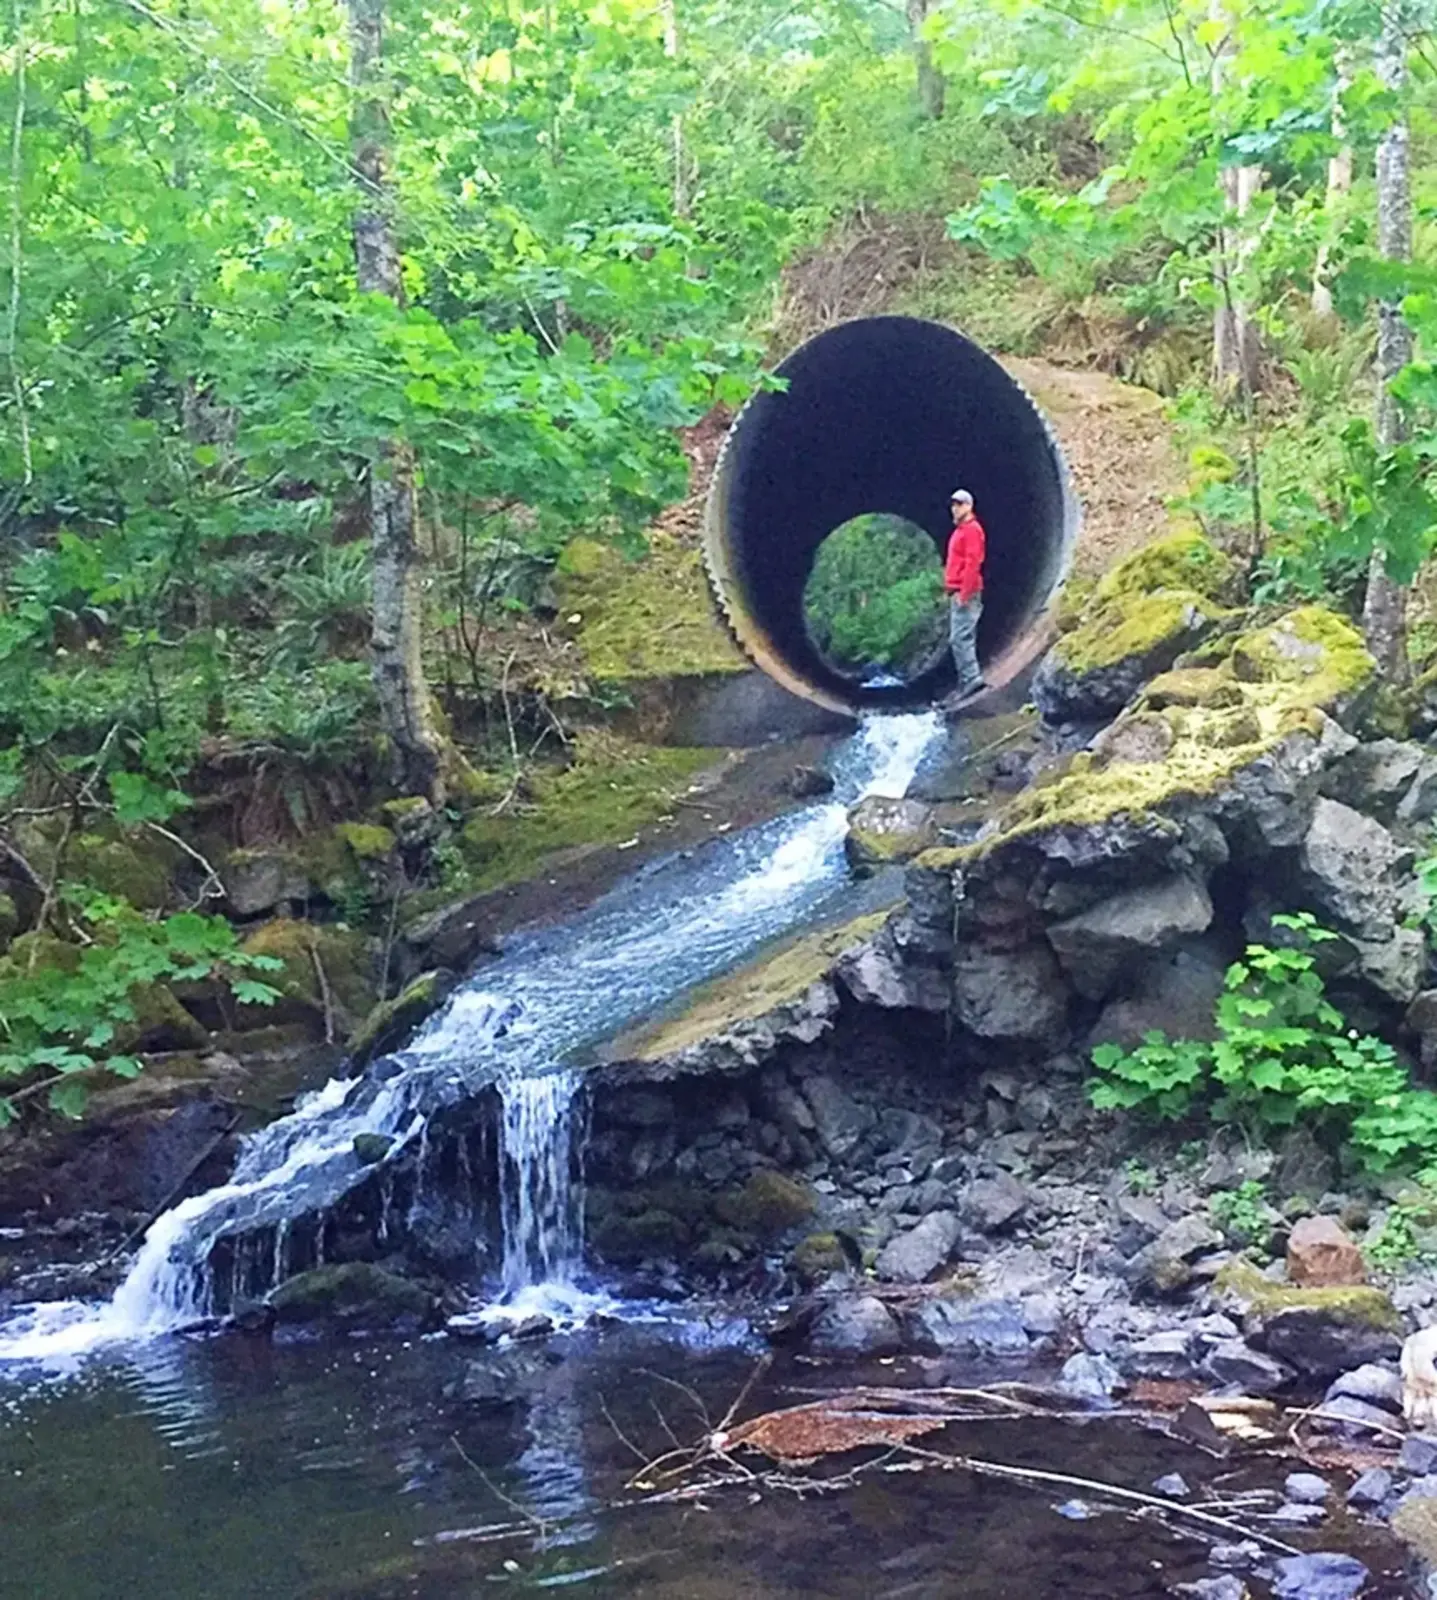 BEFORE - This culvert was inaccessible to salmon